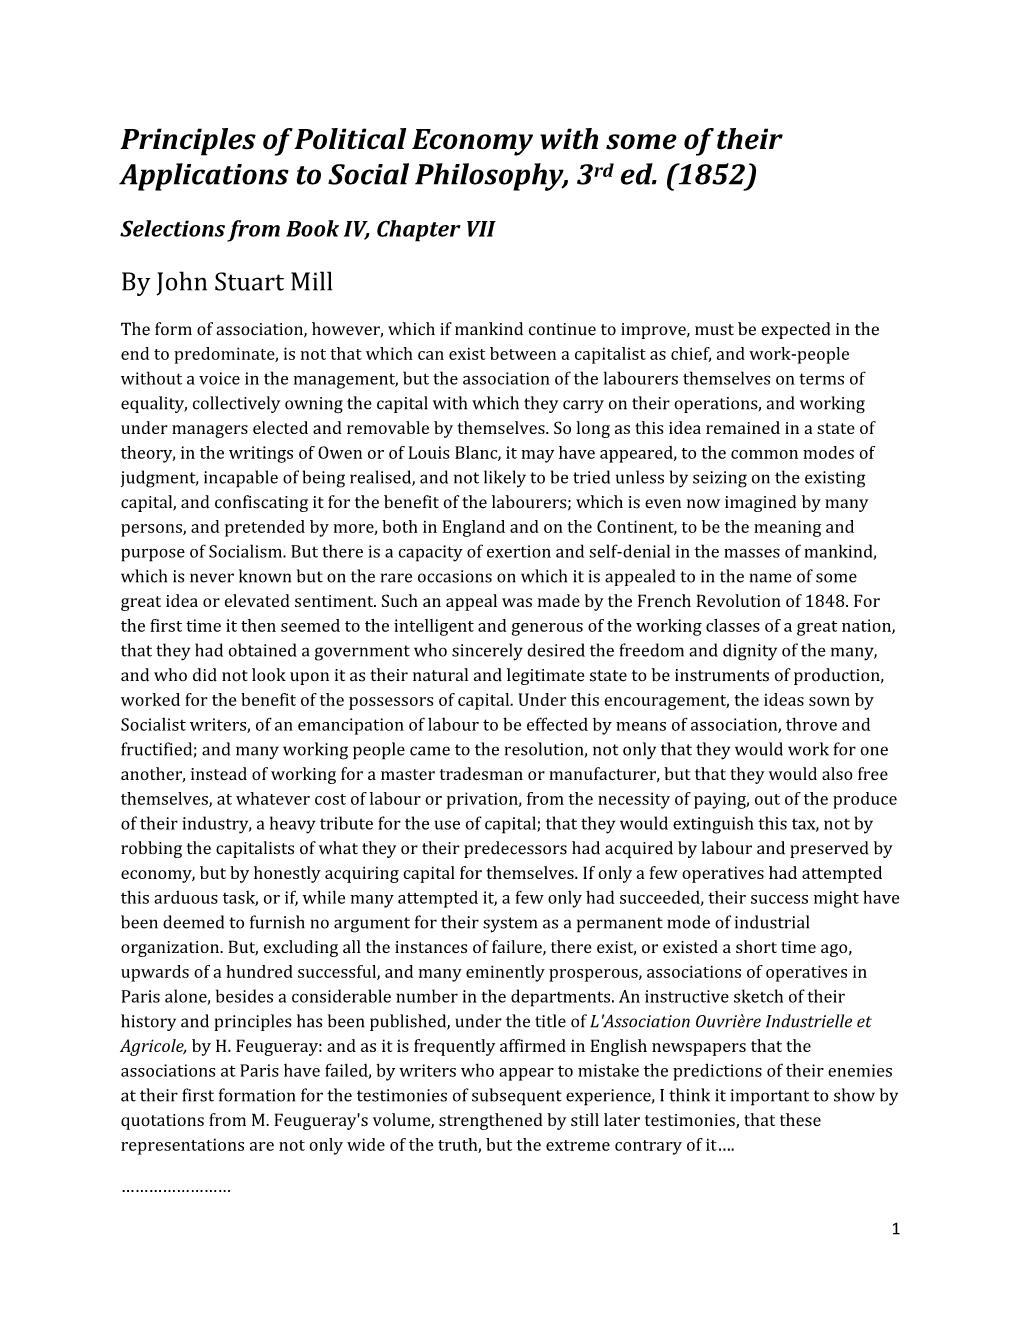 Principles of Political Economy with Some of Their Applications to Social Philosophy, 3Rd Ed